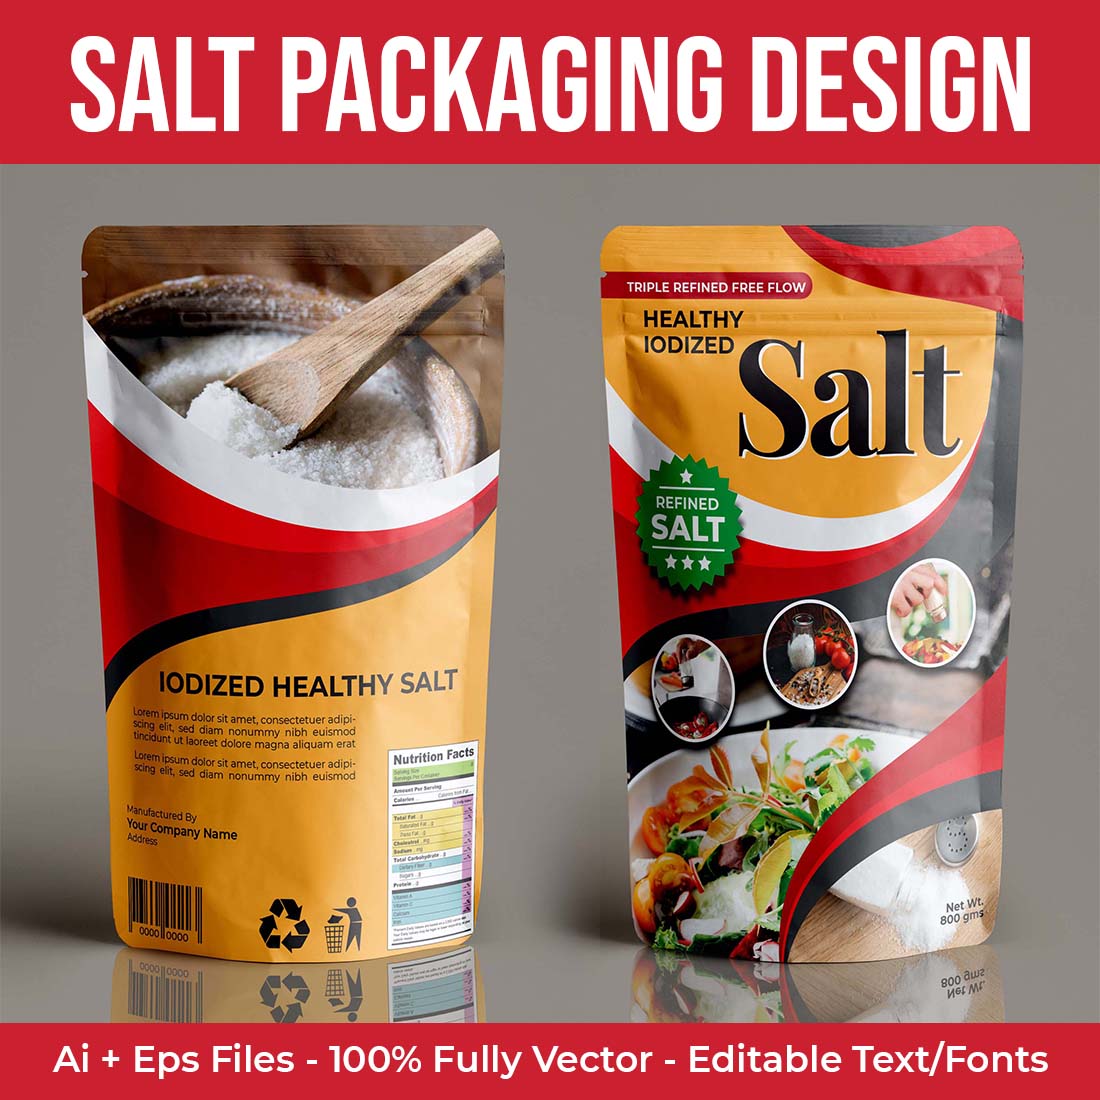 Salt Packaging Pouch Design cover image.